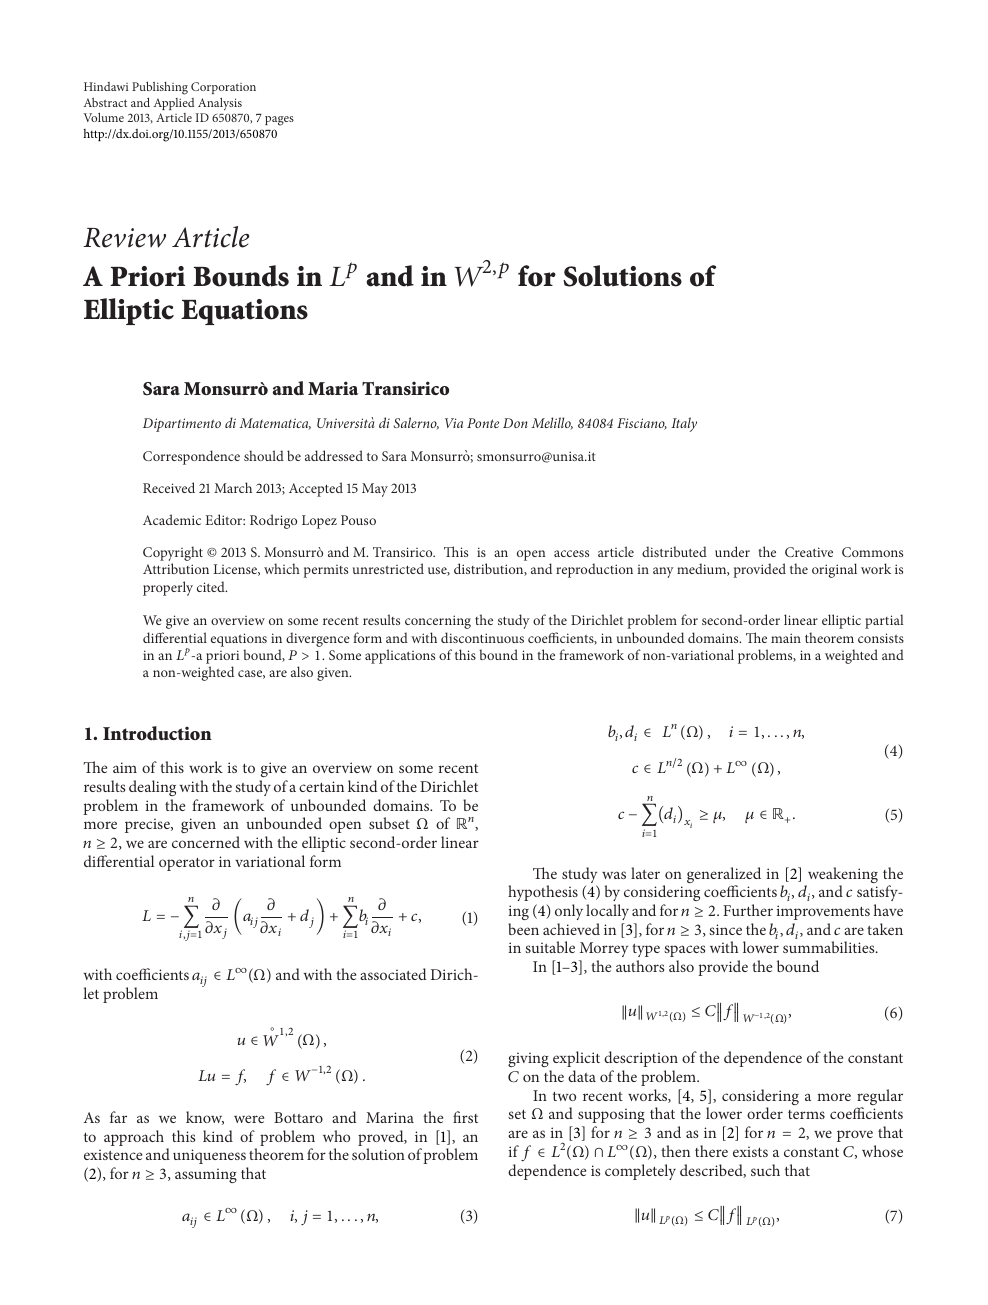 A Priori Bounds In And In For Solutions Of Elliptic Equations Topic Of Research Paper In Mathematics Download Scholarly Article Pdf And Read For Free On Cyberleninka Open Science Hub